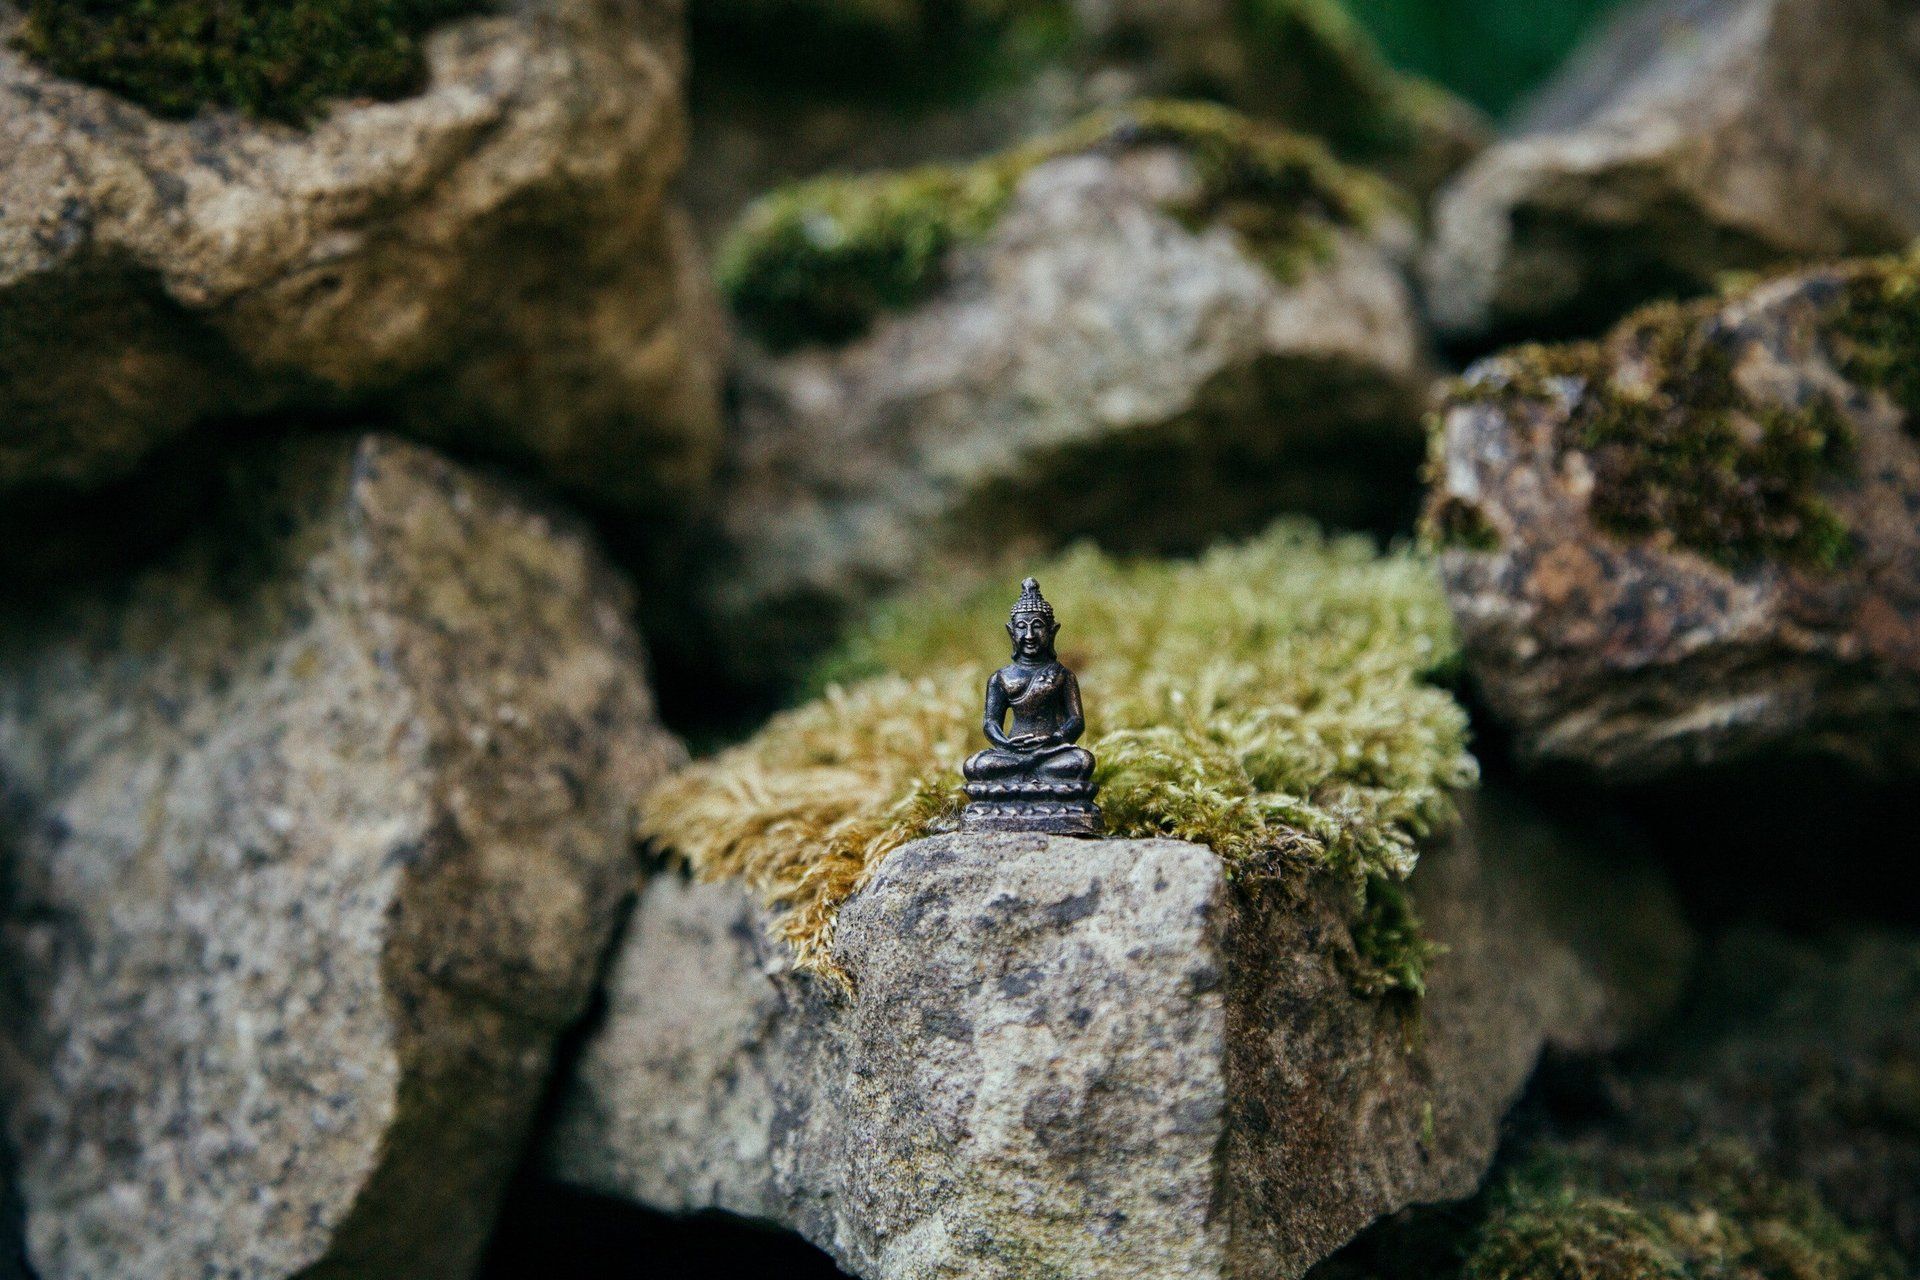 Get Involved: Rocks covered in moss with a small black statue